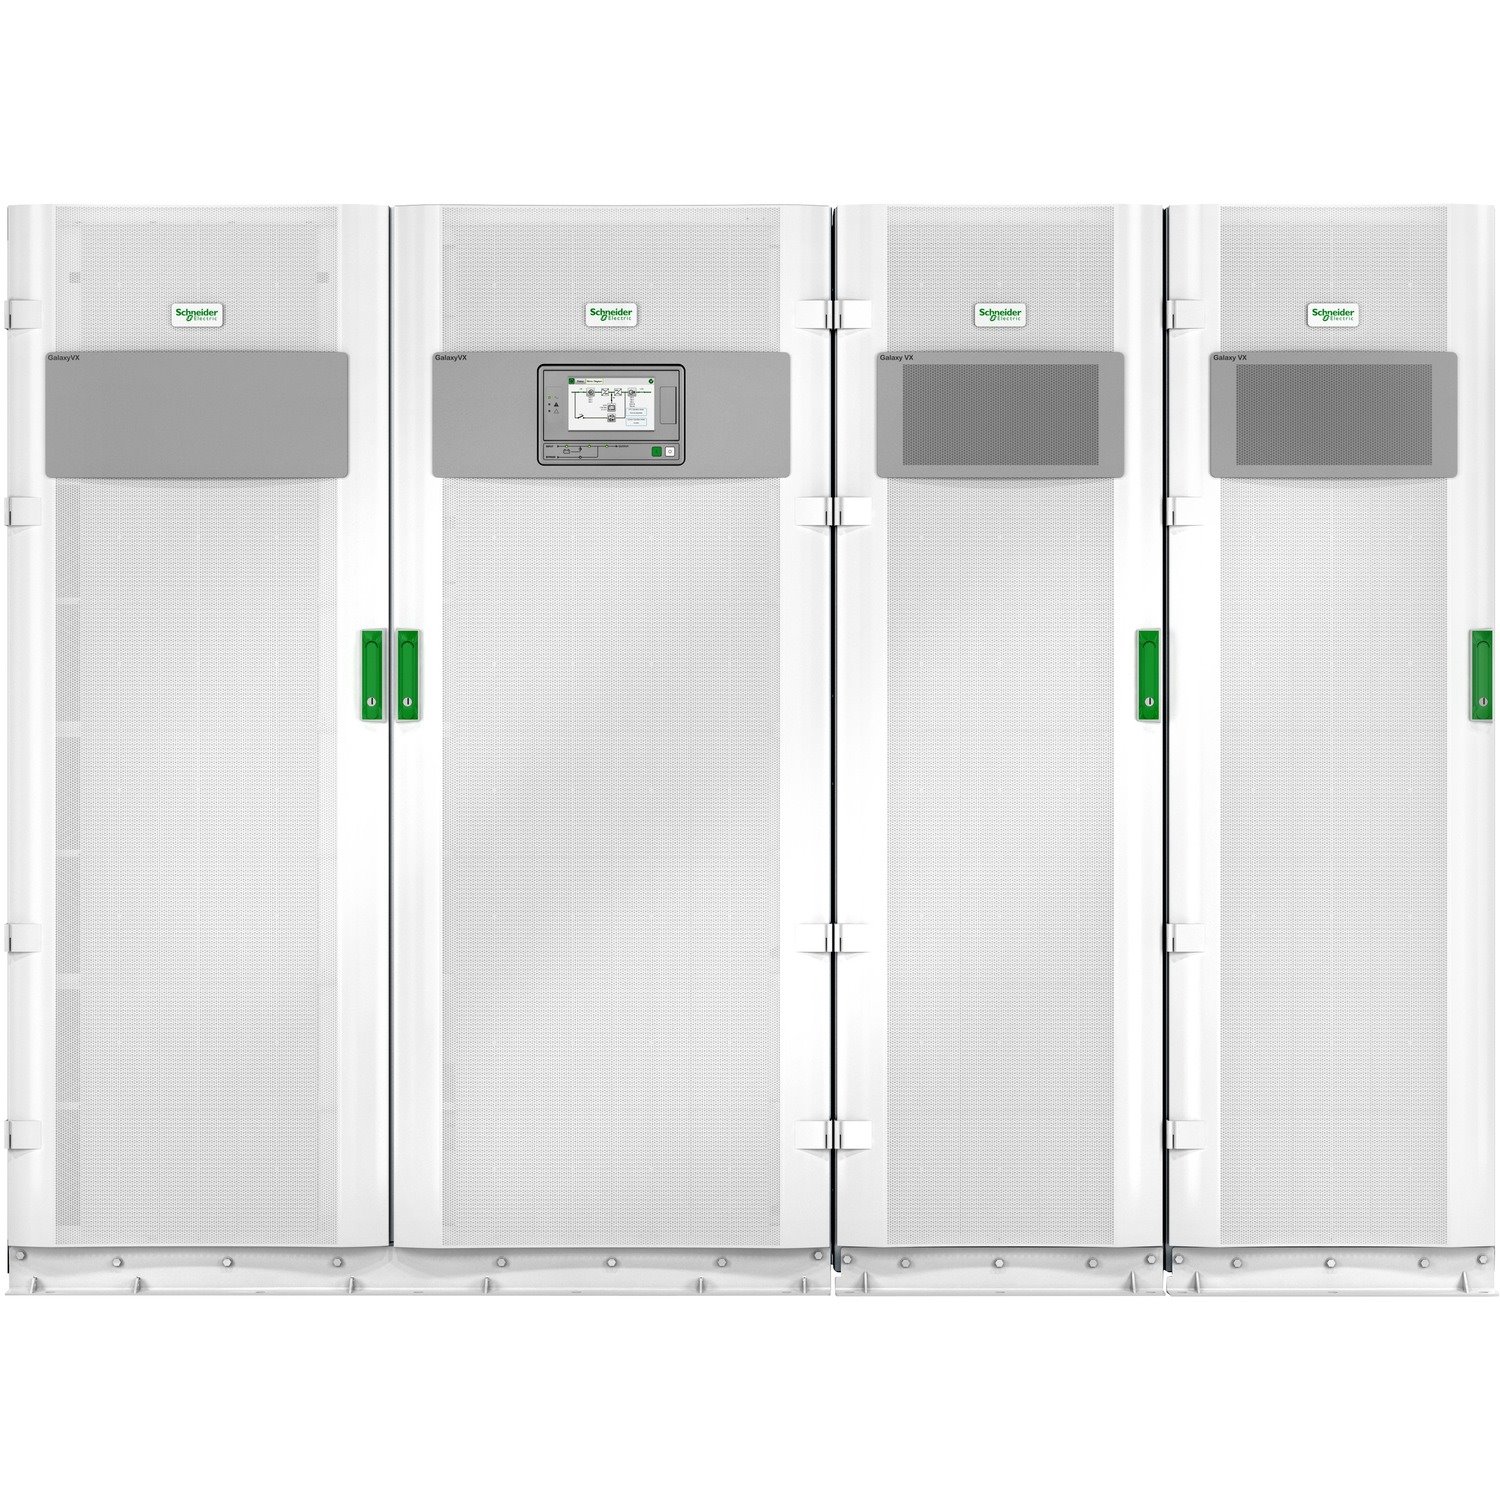 APC by Schneider Electric Galaxy VX 500kVA Scalable to 1000kVA 480V, Start up 5x8